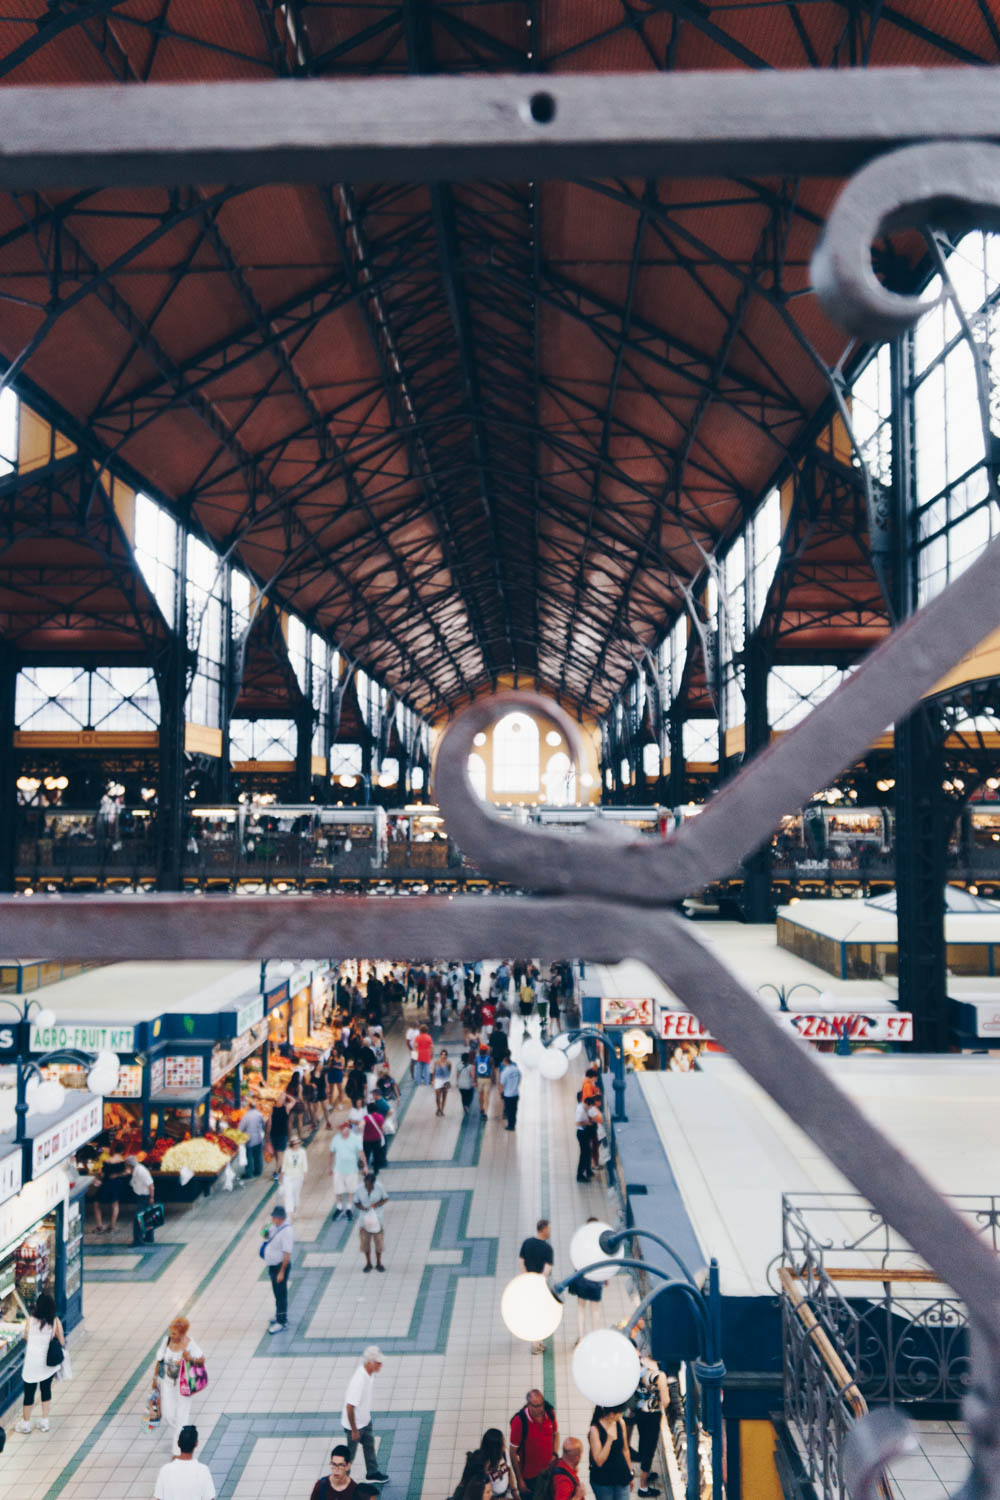 Budapest Hungary / Travel Guide / Central Market Hall / RG Daily Blog /